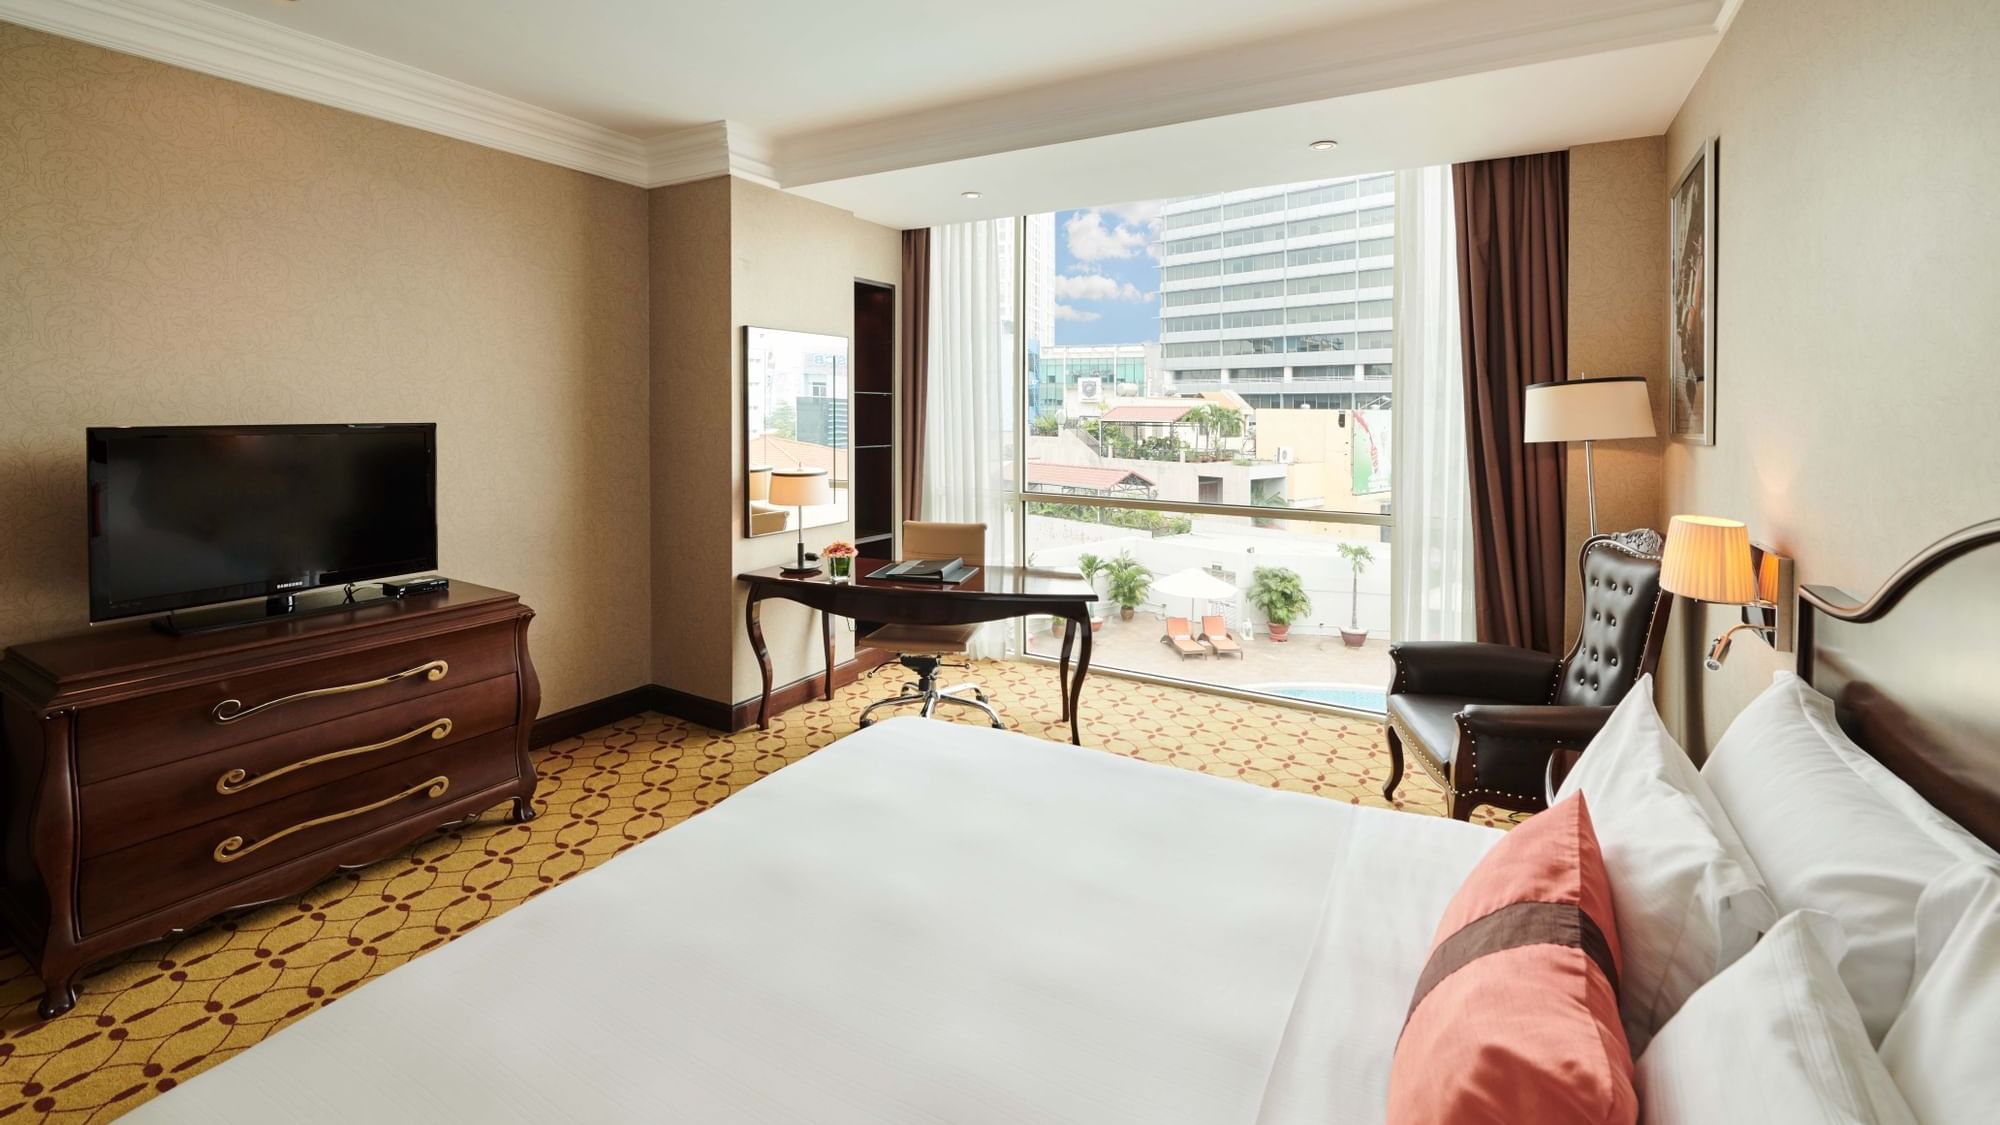 Bed & furniture in Deluxe Room with city view at Eastin Hotels